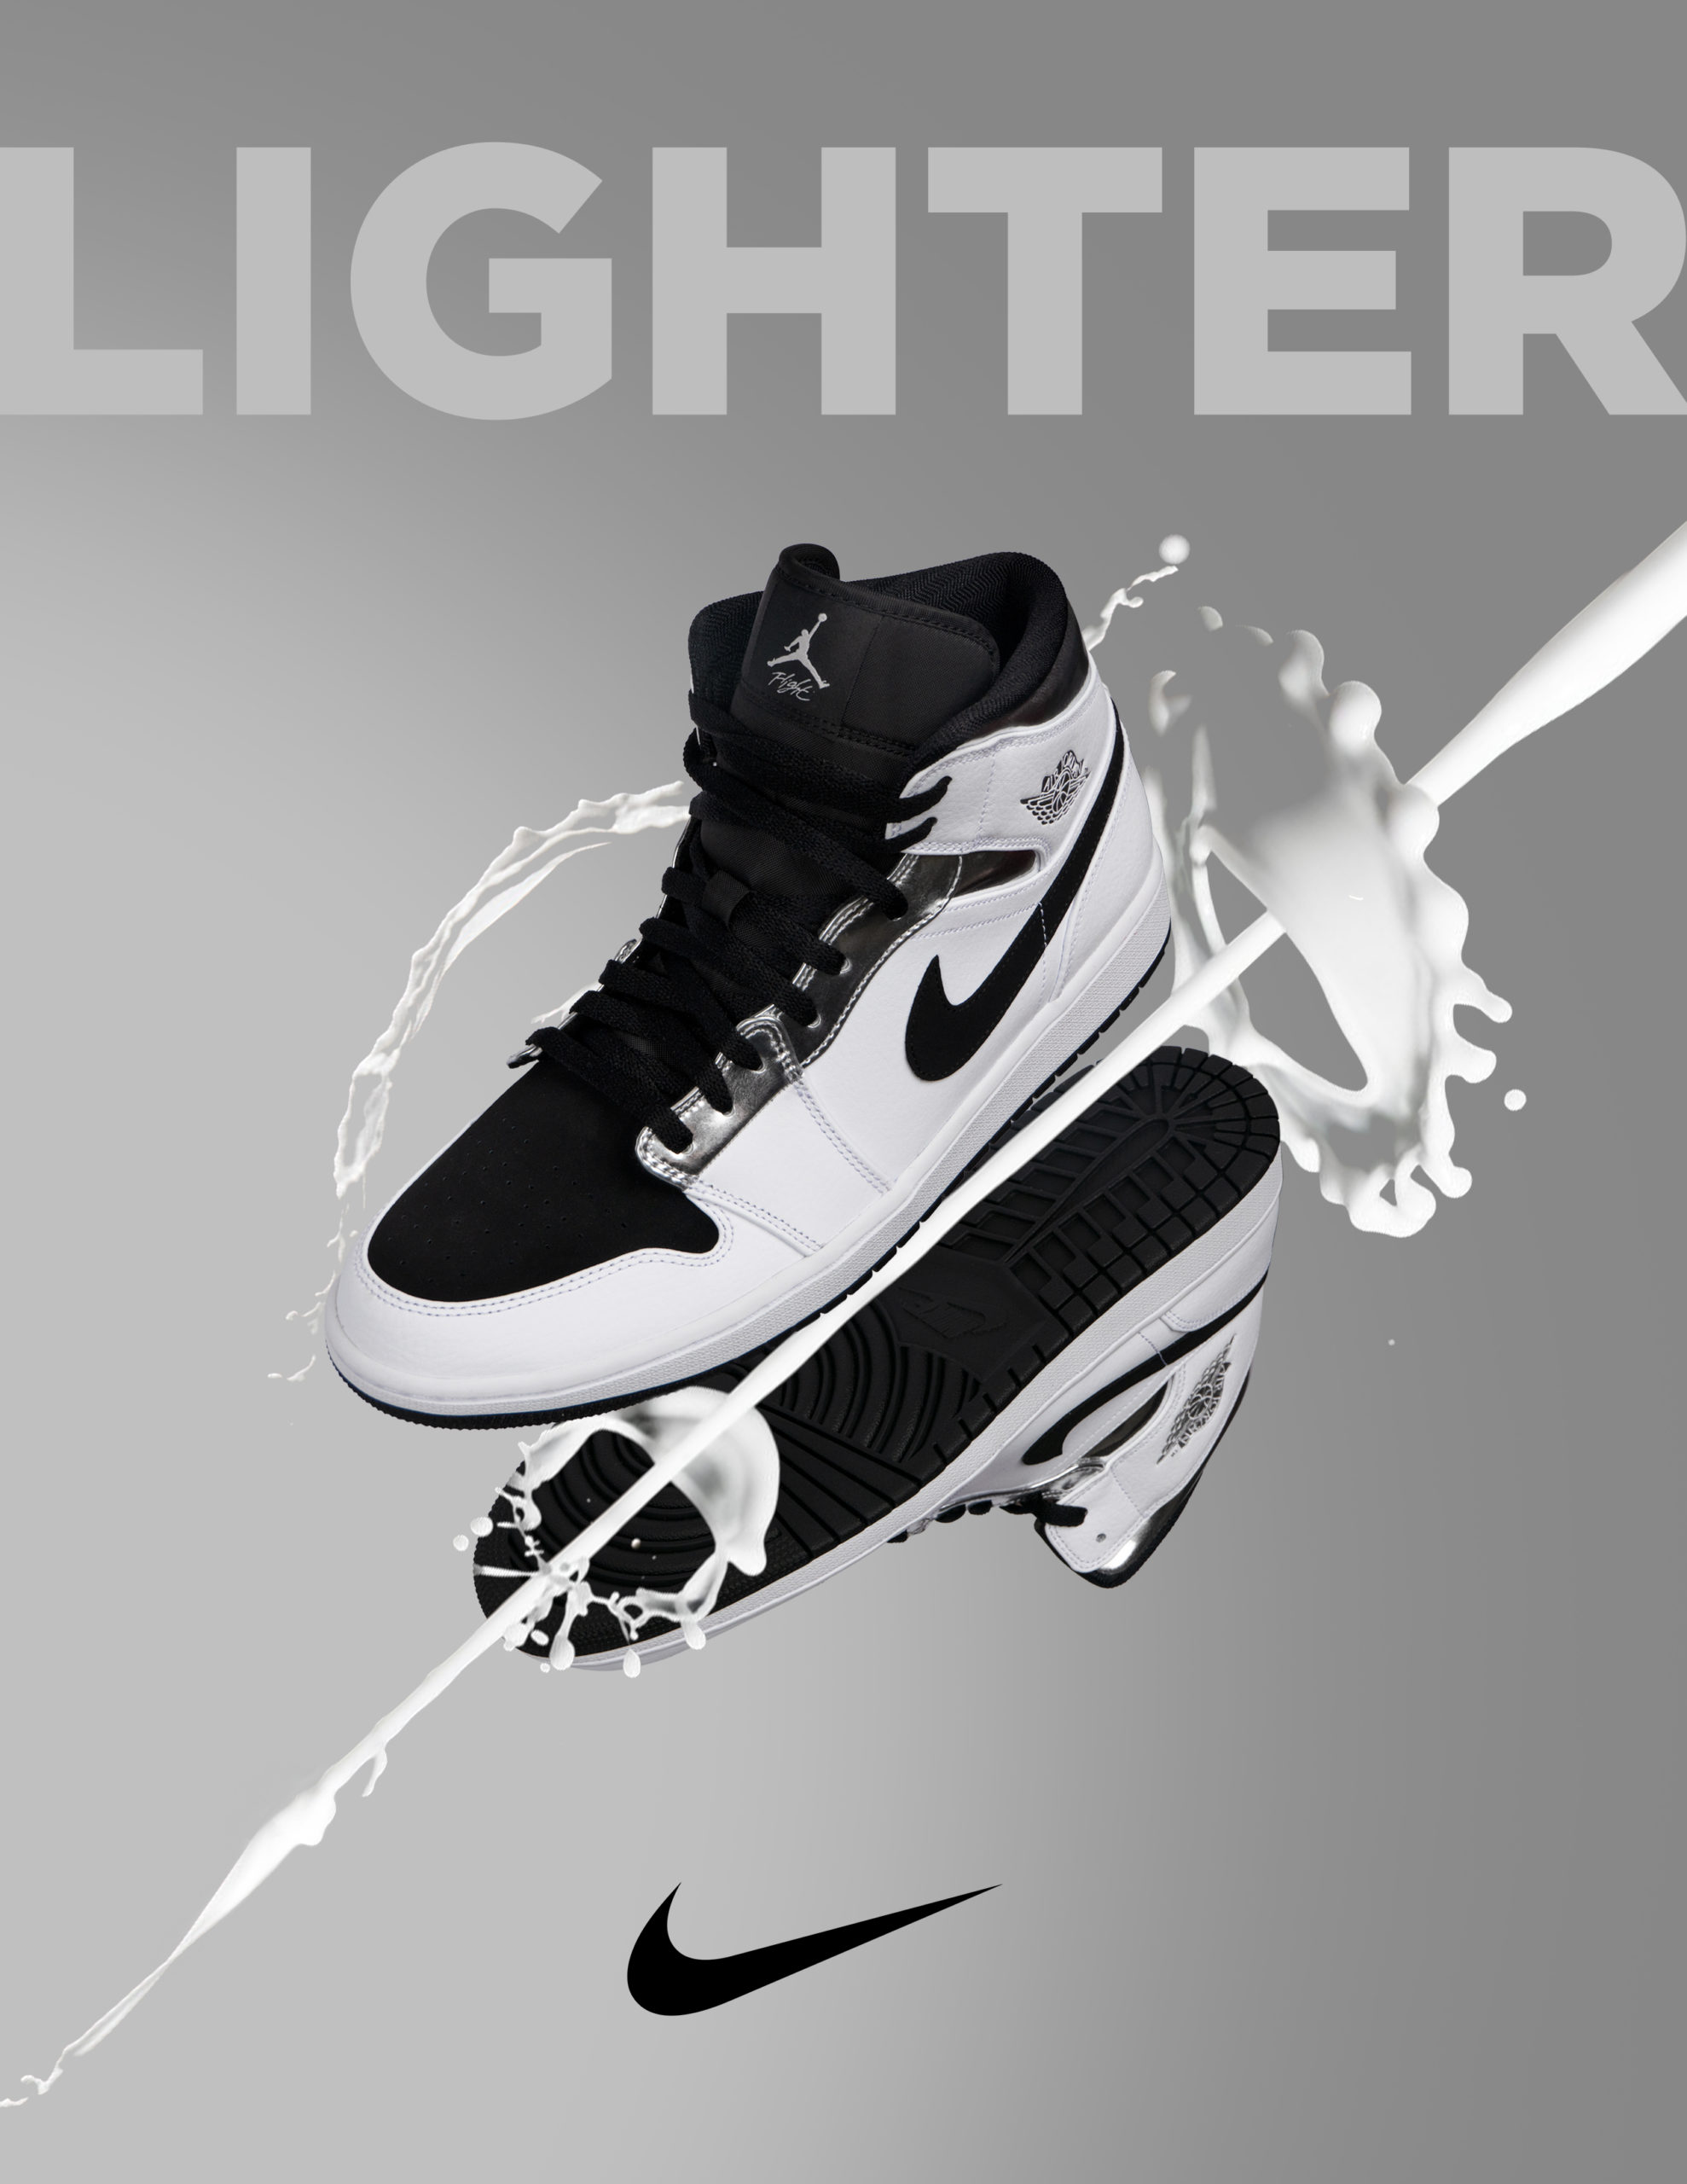 Nike Poster Promotion – James T Earhart